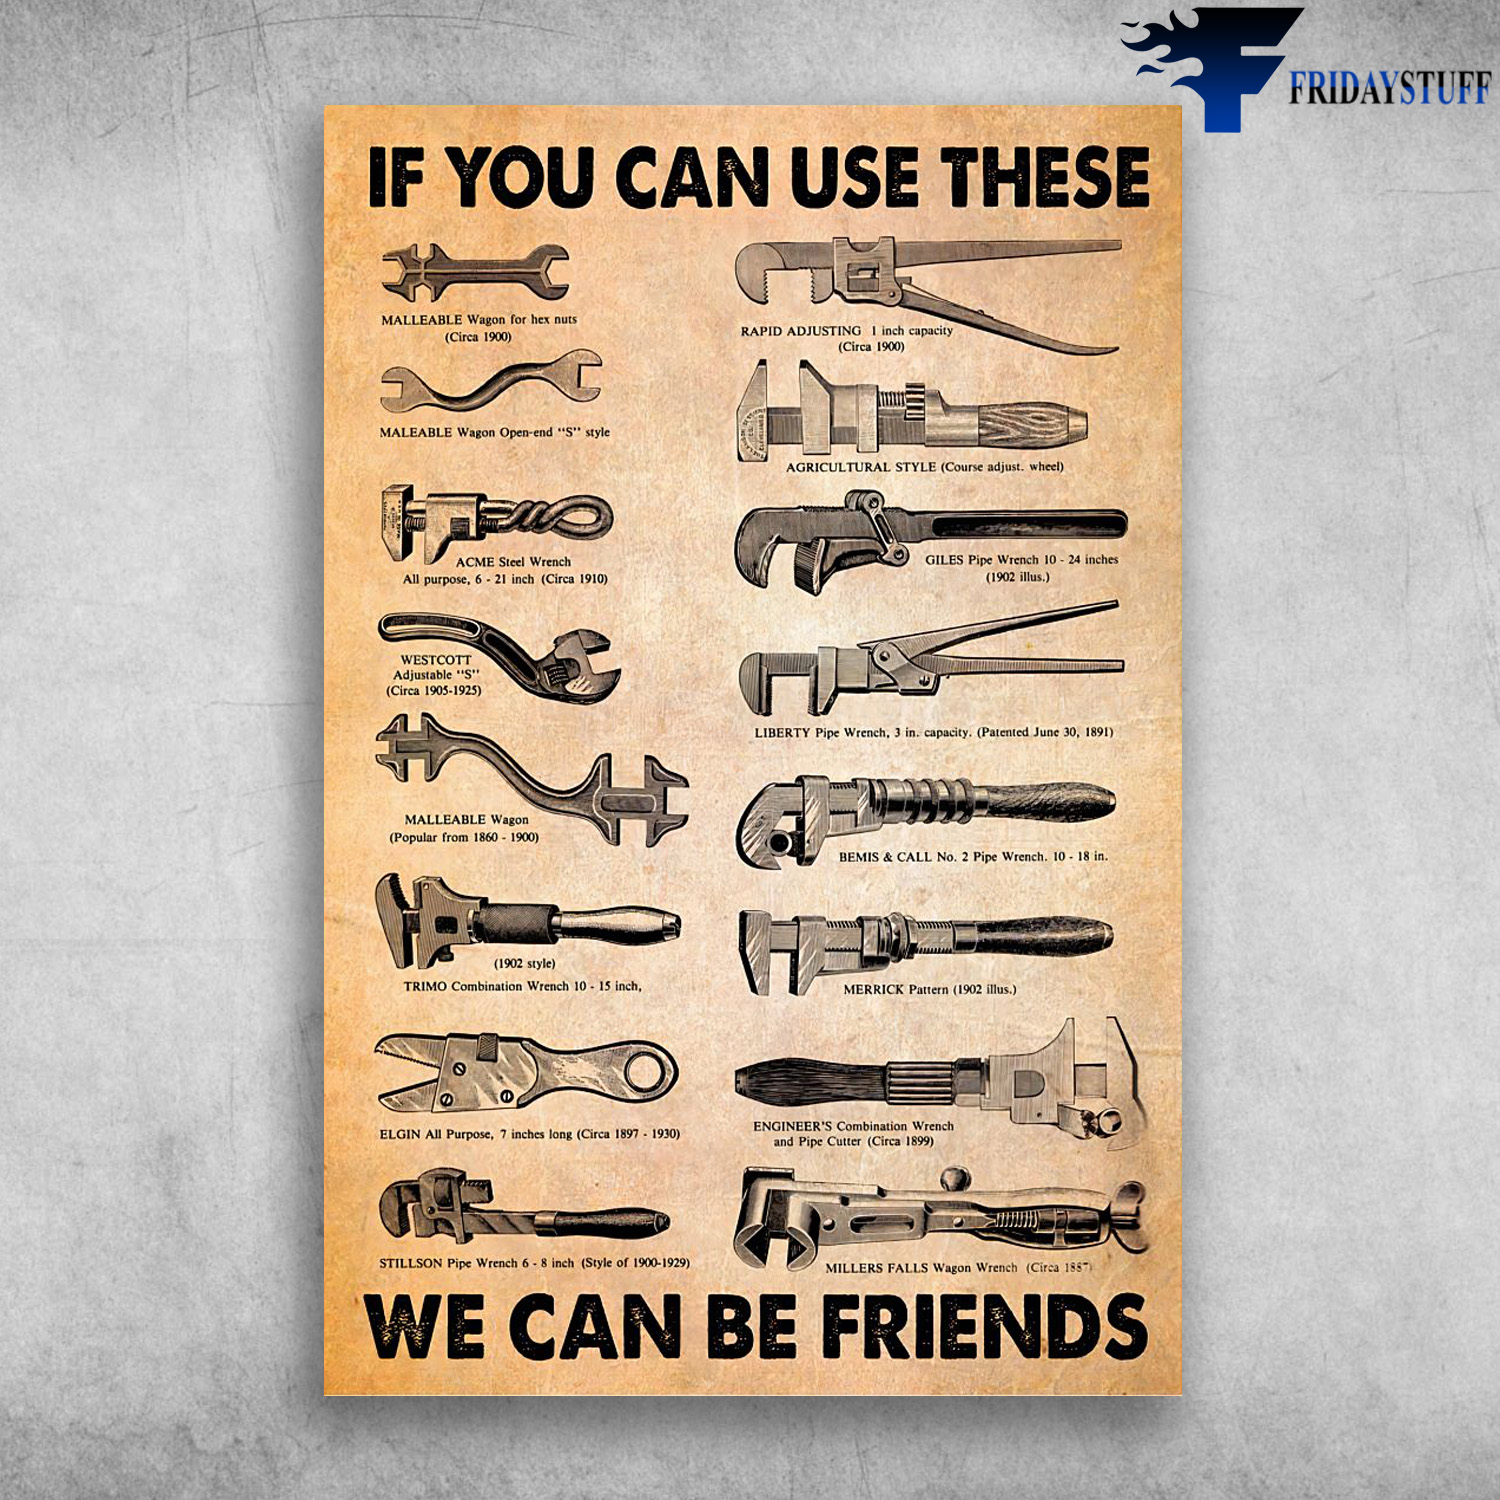 Mechanic Tools - If You Can Use These, We Can Be Friends